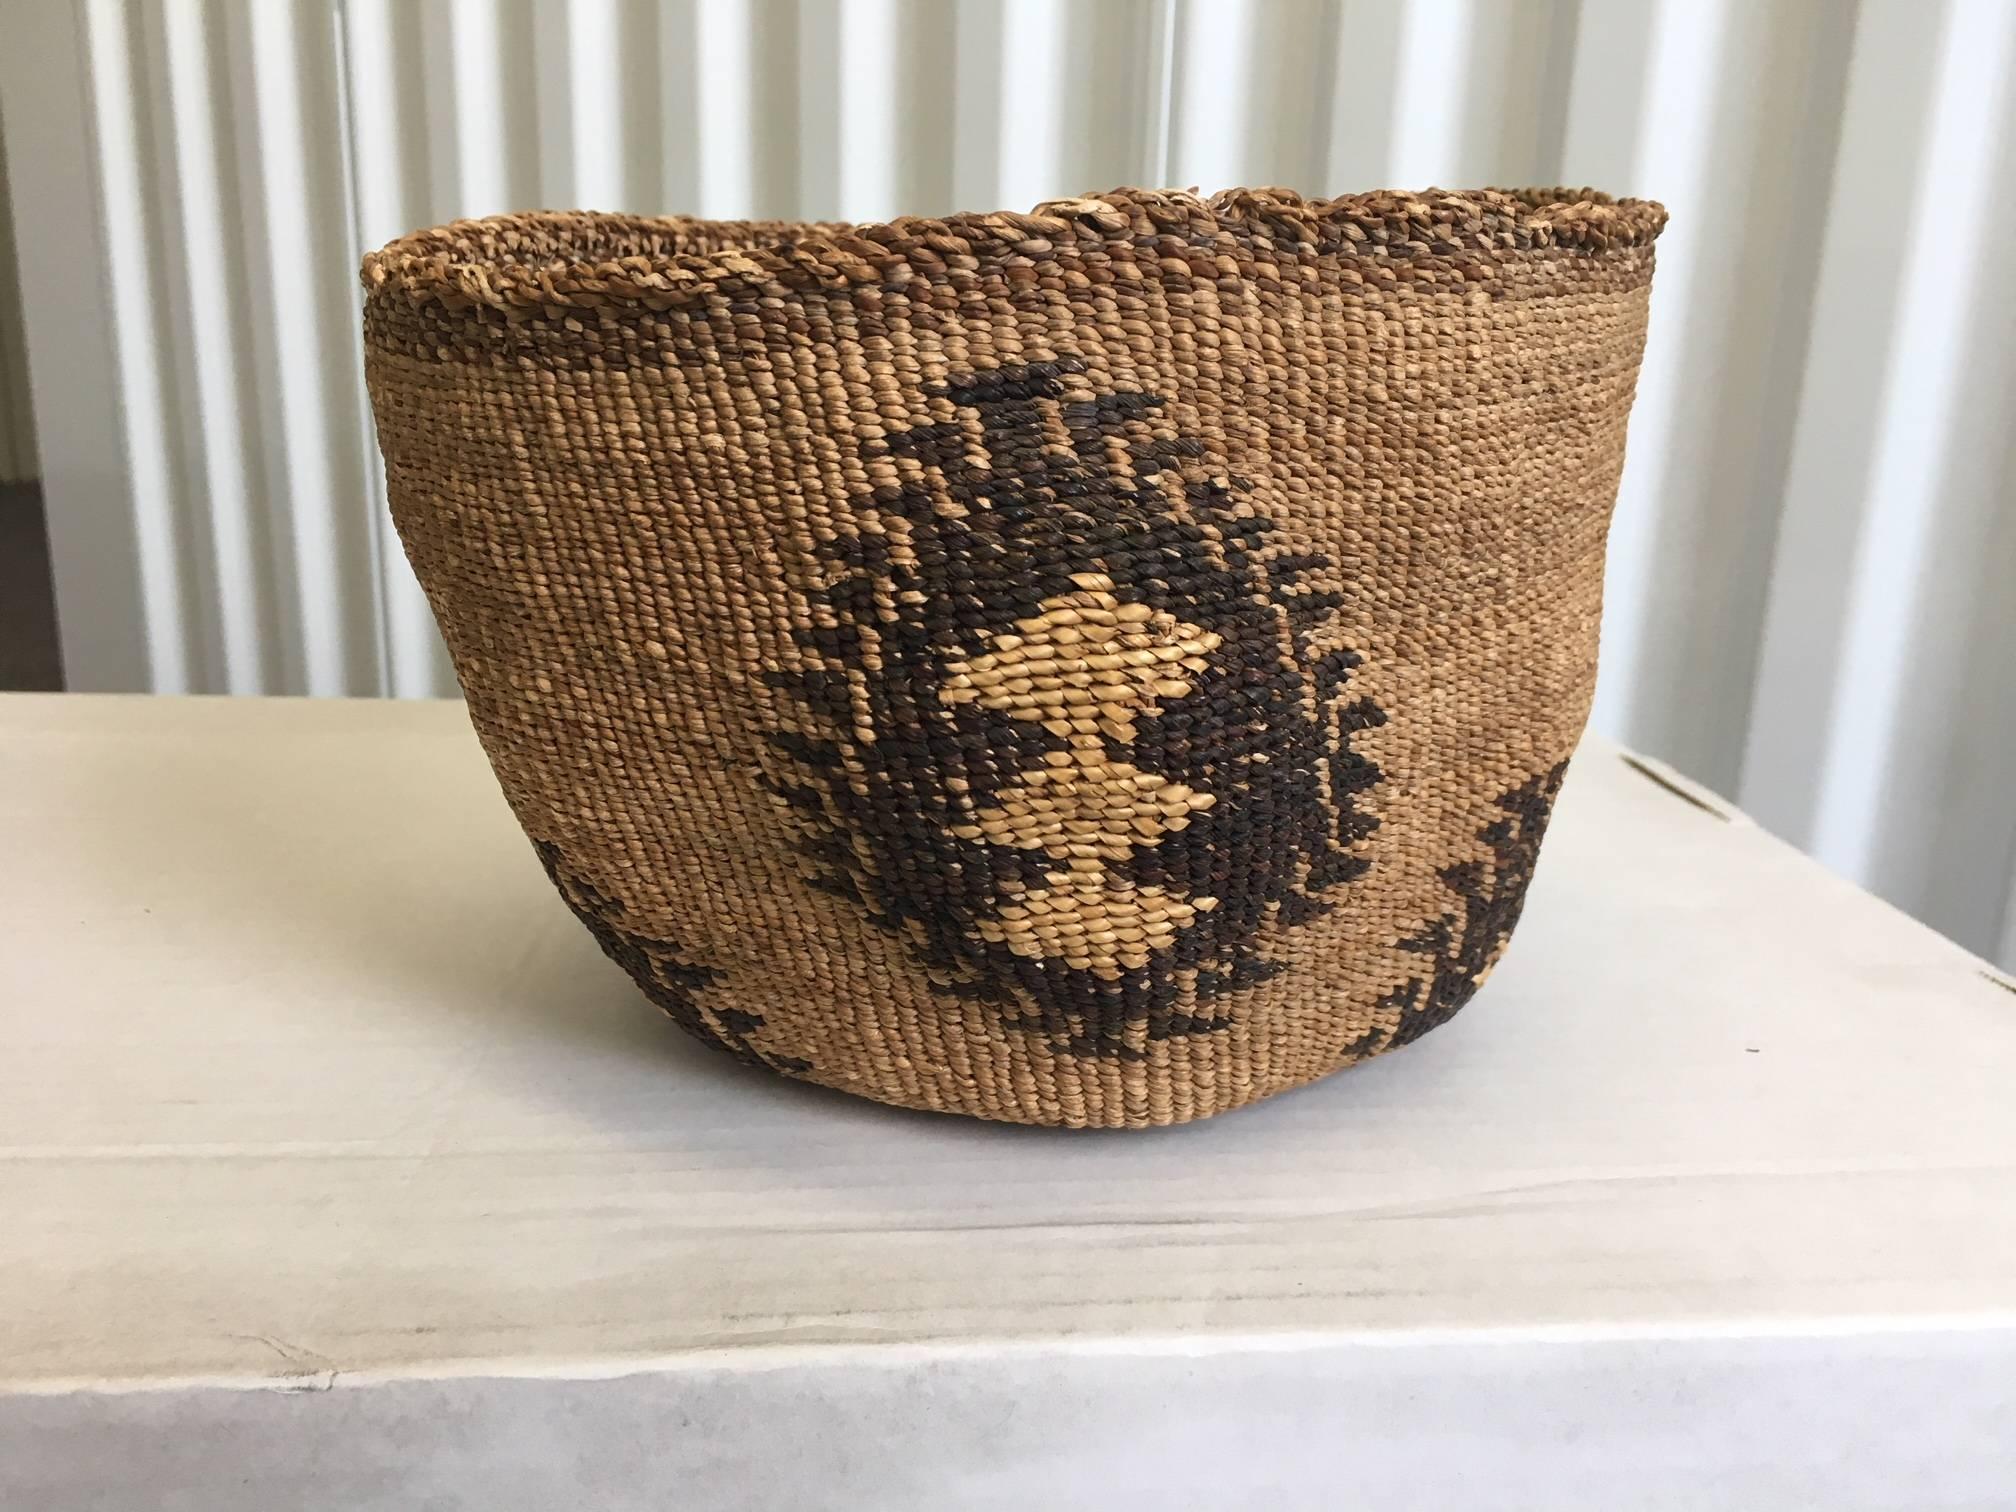 Native American Klamath basket. This is a soft and pliable basket with triple triangle motif woven in tule and dyed tule in characteristic overlay weave. There is some loss around the rim edge and a slightly irregular shape on one side. Otherwise in